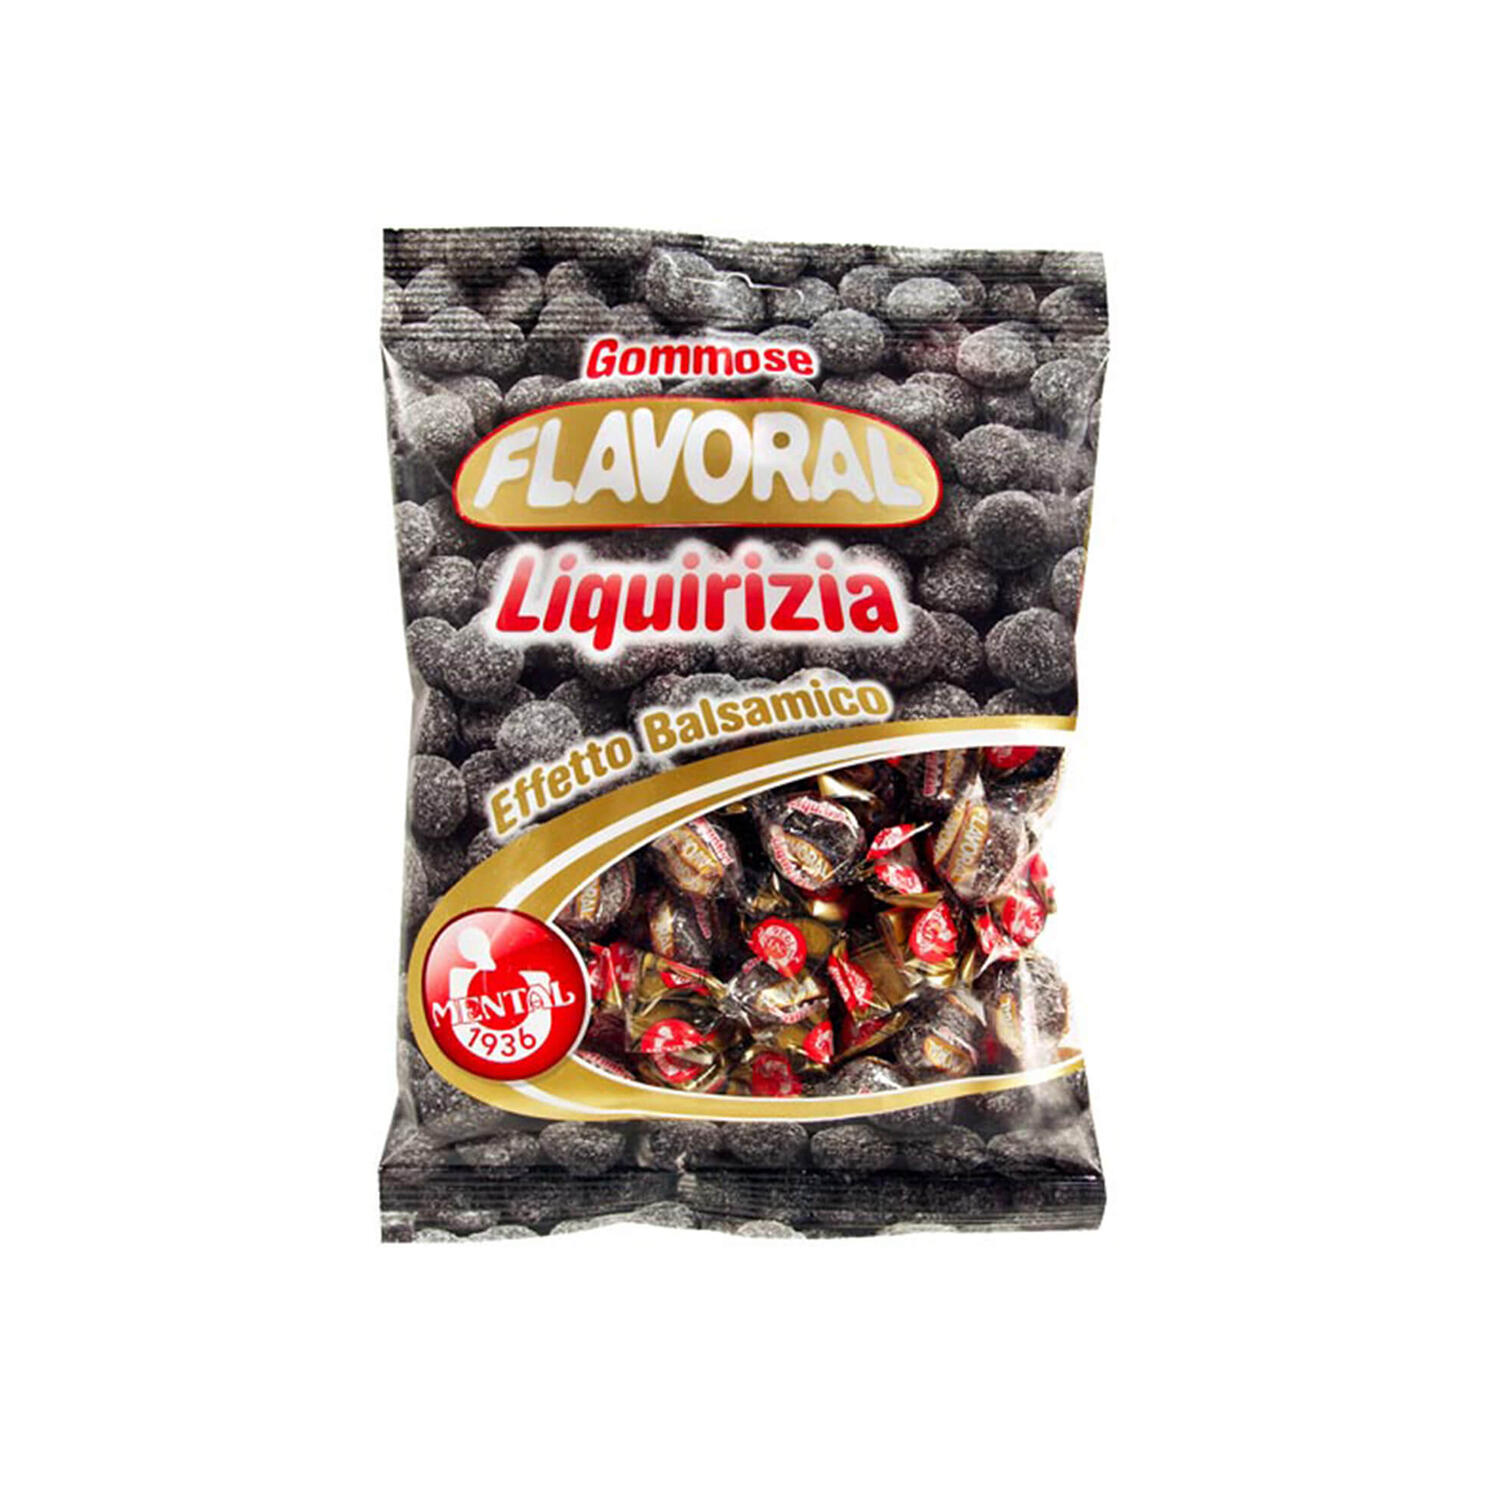 Licorice Flavoral Large Packet - Single Pack - Large Packets